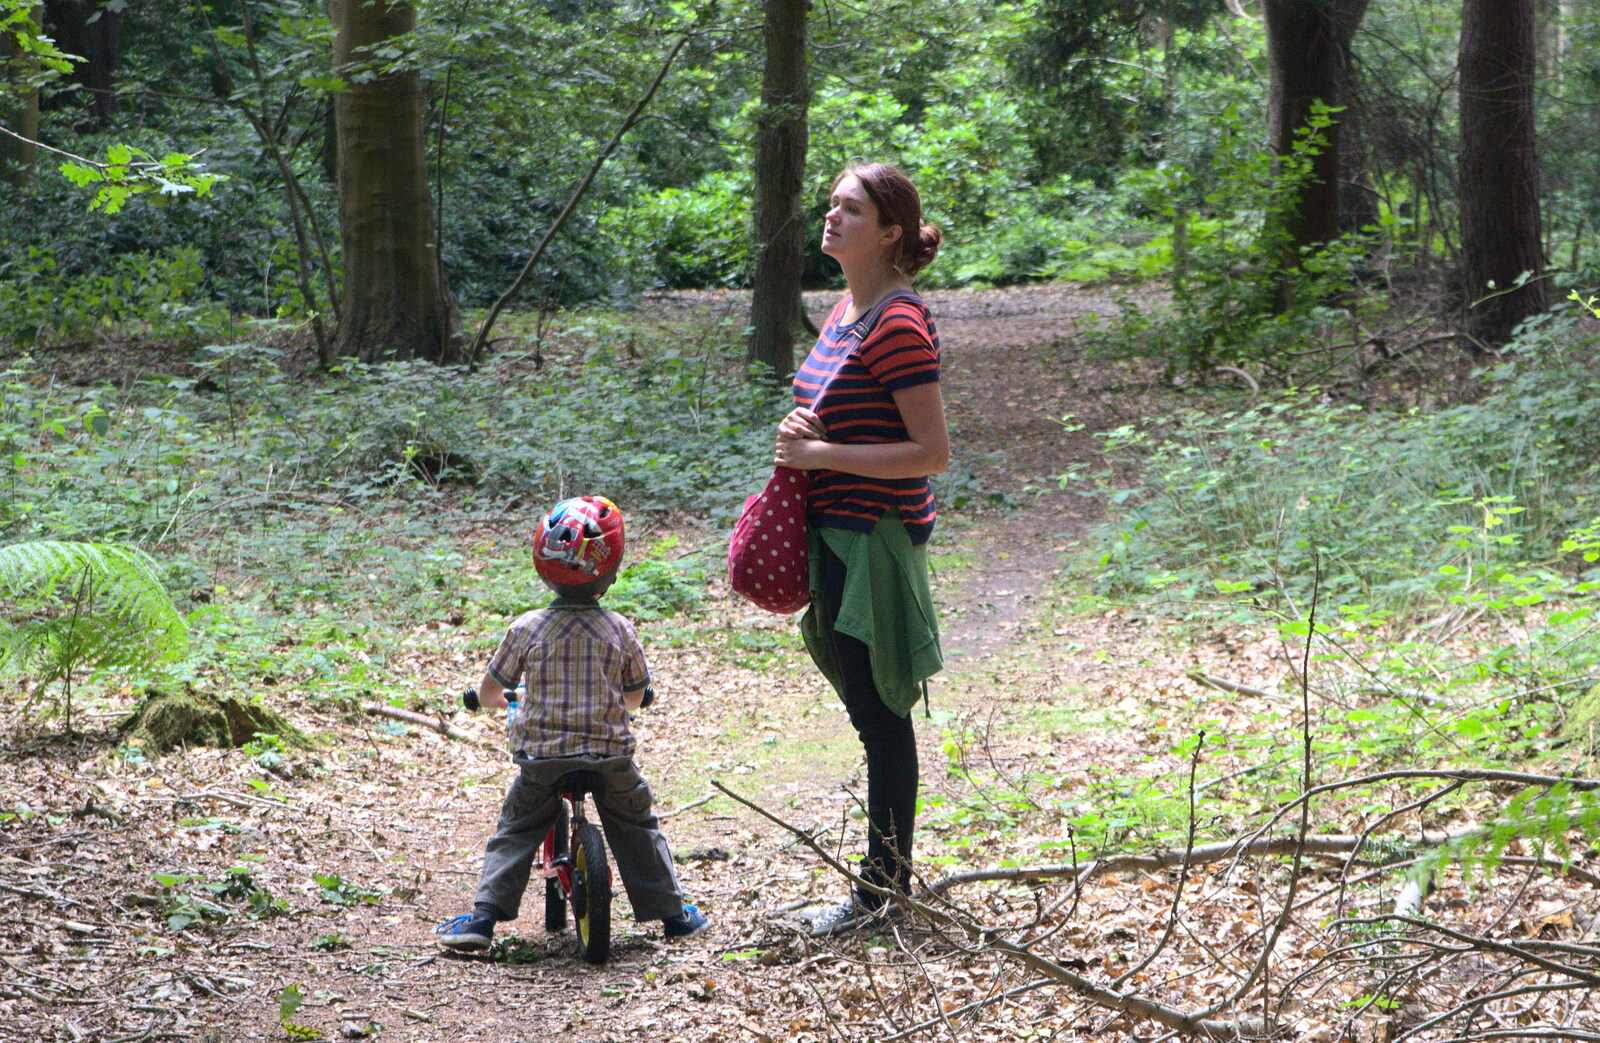 Harry and Isobel in the woods from The Archaeology of Dunwich: A Camping Trip, Dunwich, Suffolk - 1st August 2015